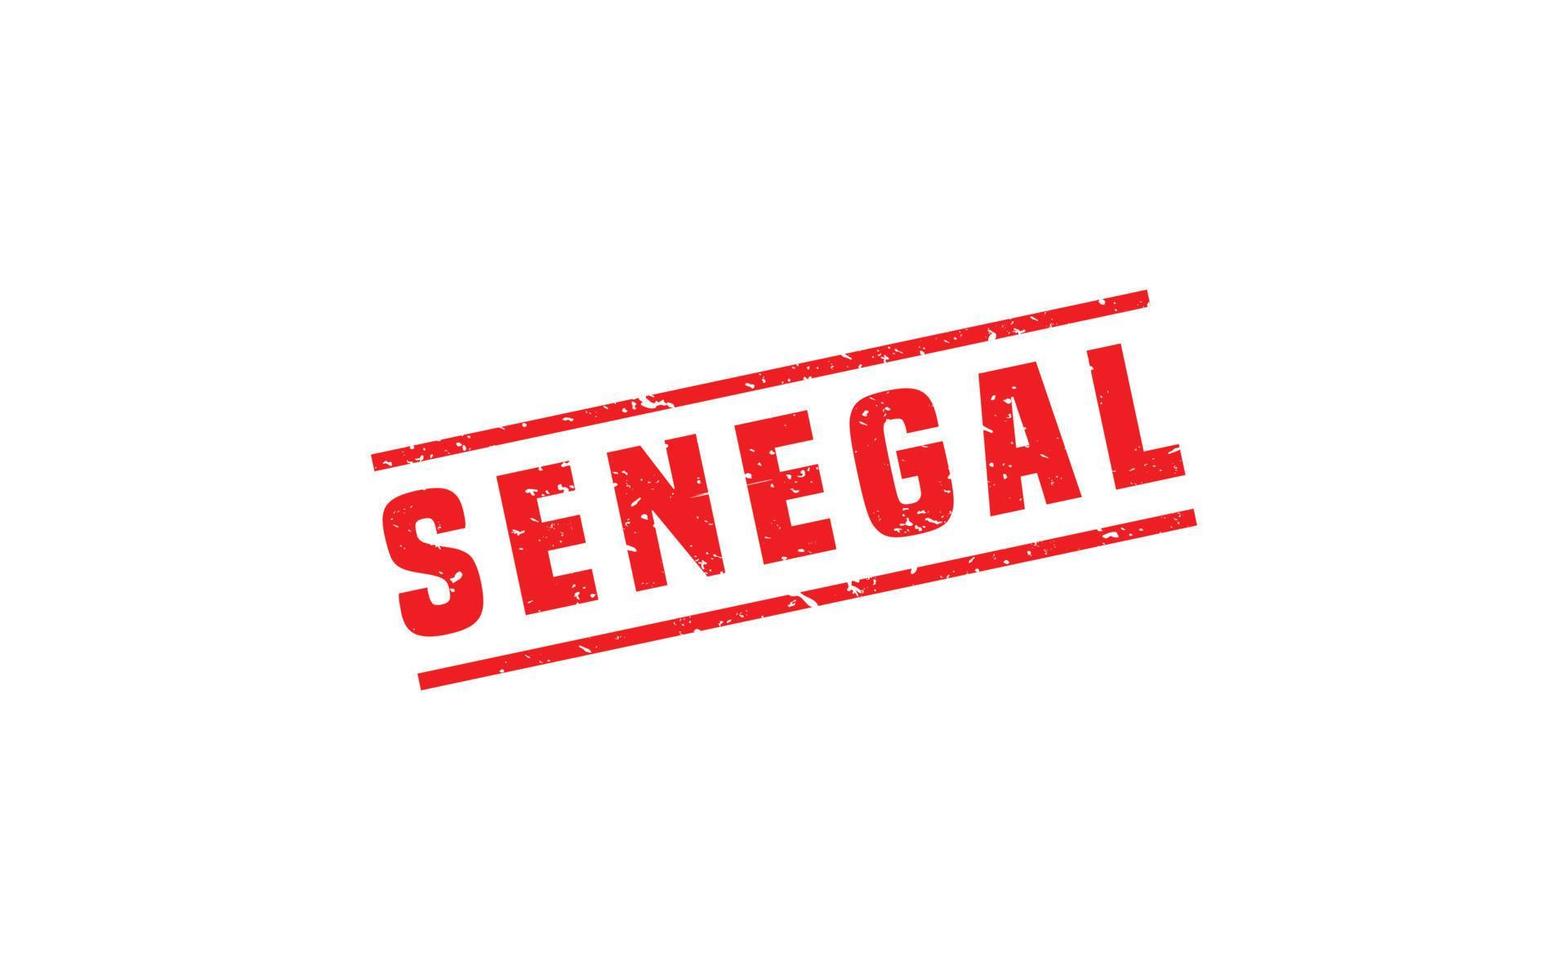 SENEGAL stamp rubber with grunge style on white background vector